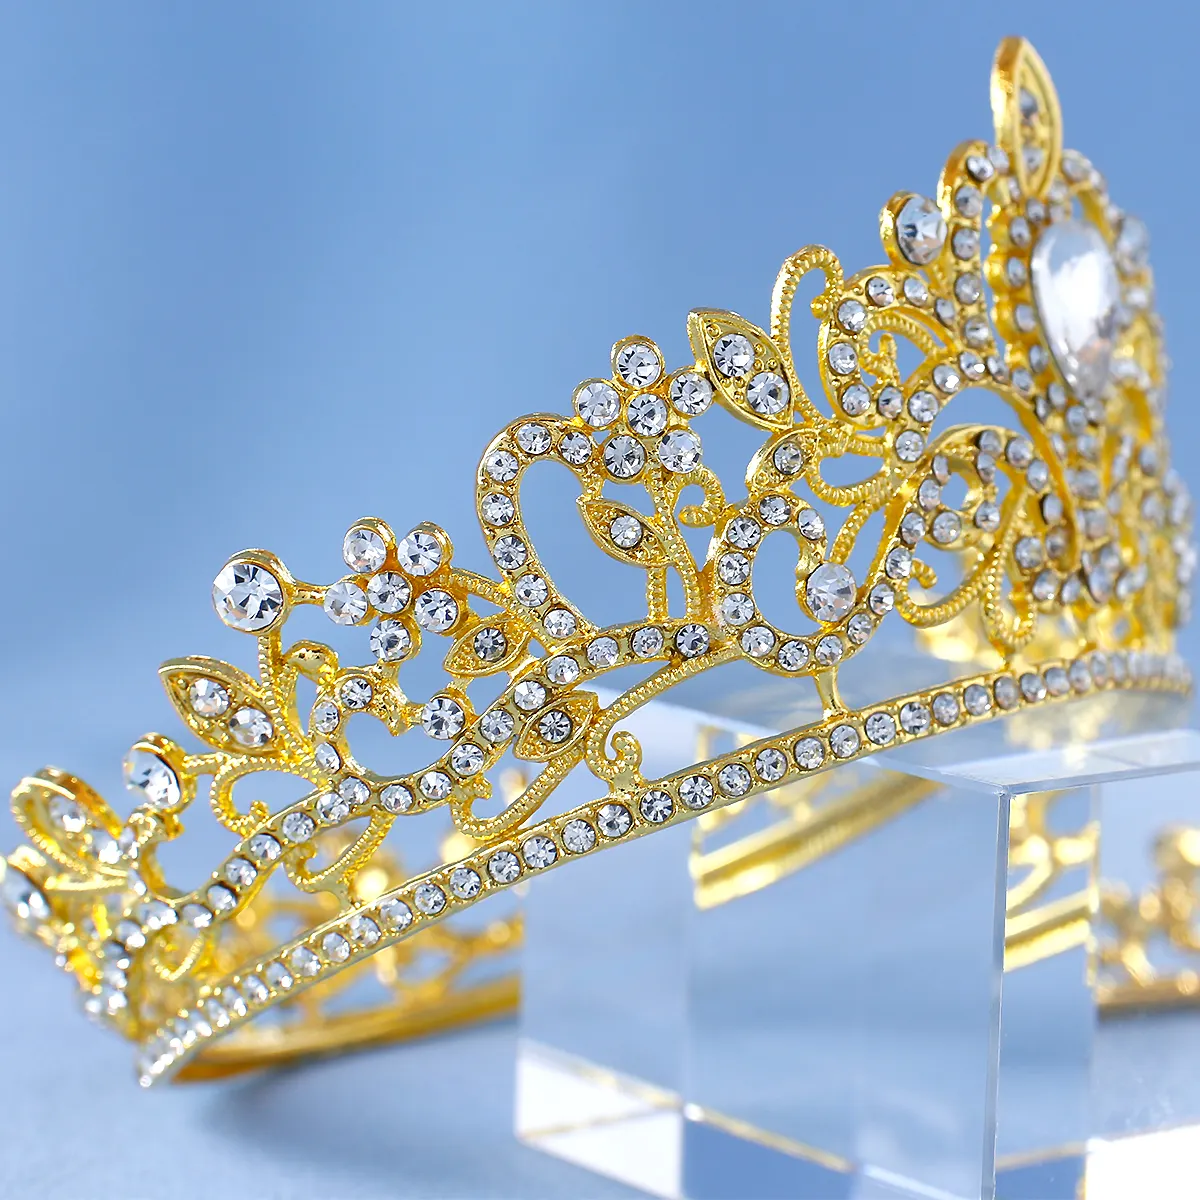 Crystal Queen King Wedding Queen Princess Prom Tiara Round Crown For Prom Party Homecoming Halloween Cosplay Accessories